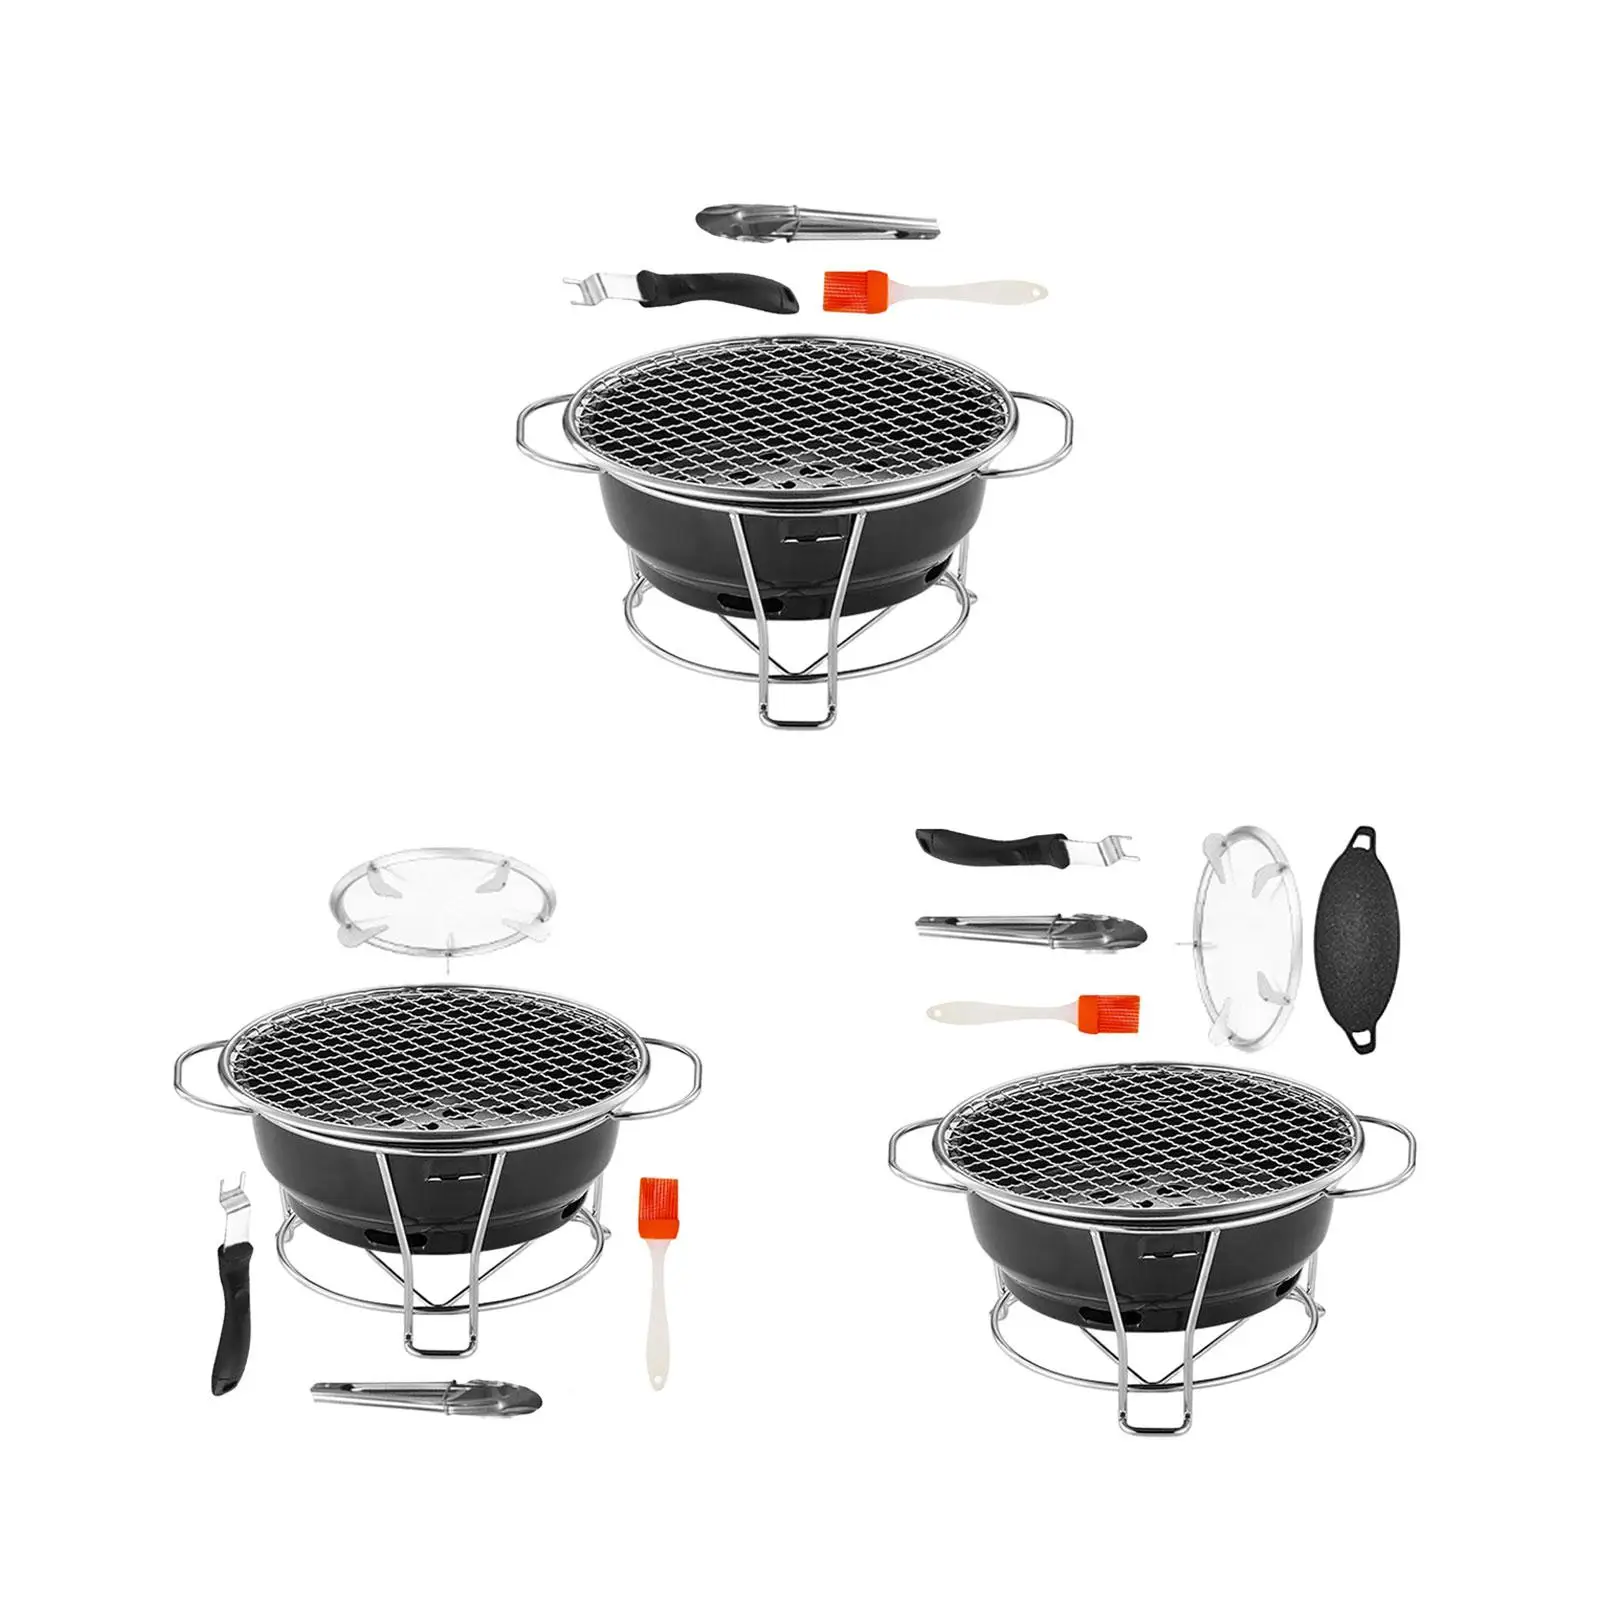 Korean Barbecue Grill Camping BBQ Stove Compact for Outdoor Picnic Backyard